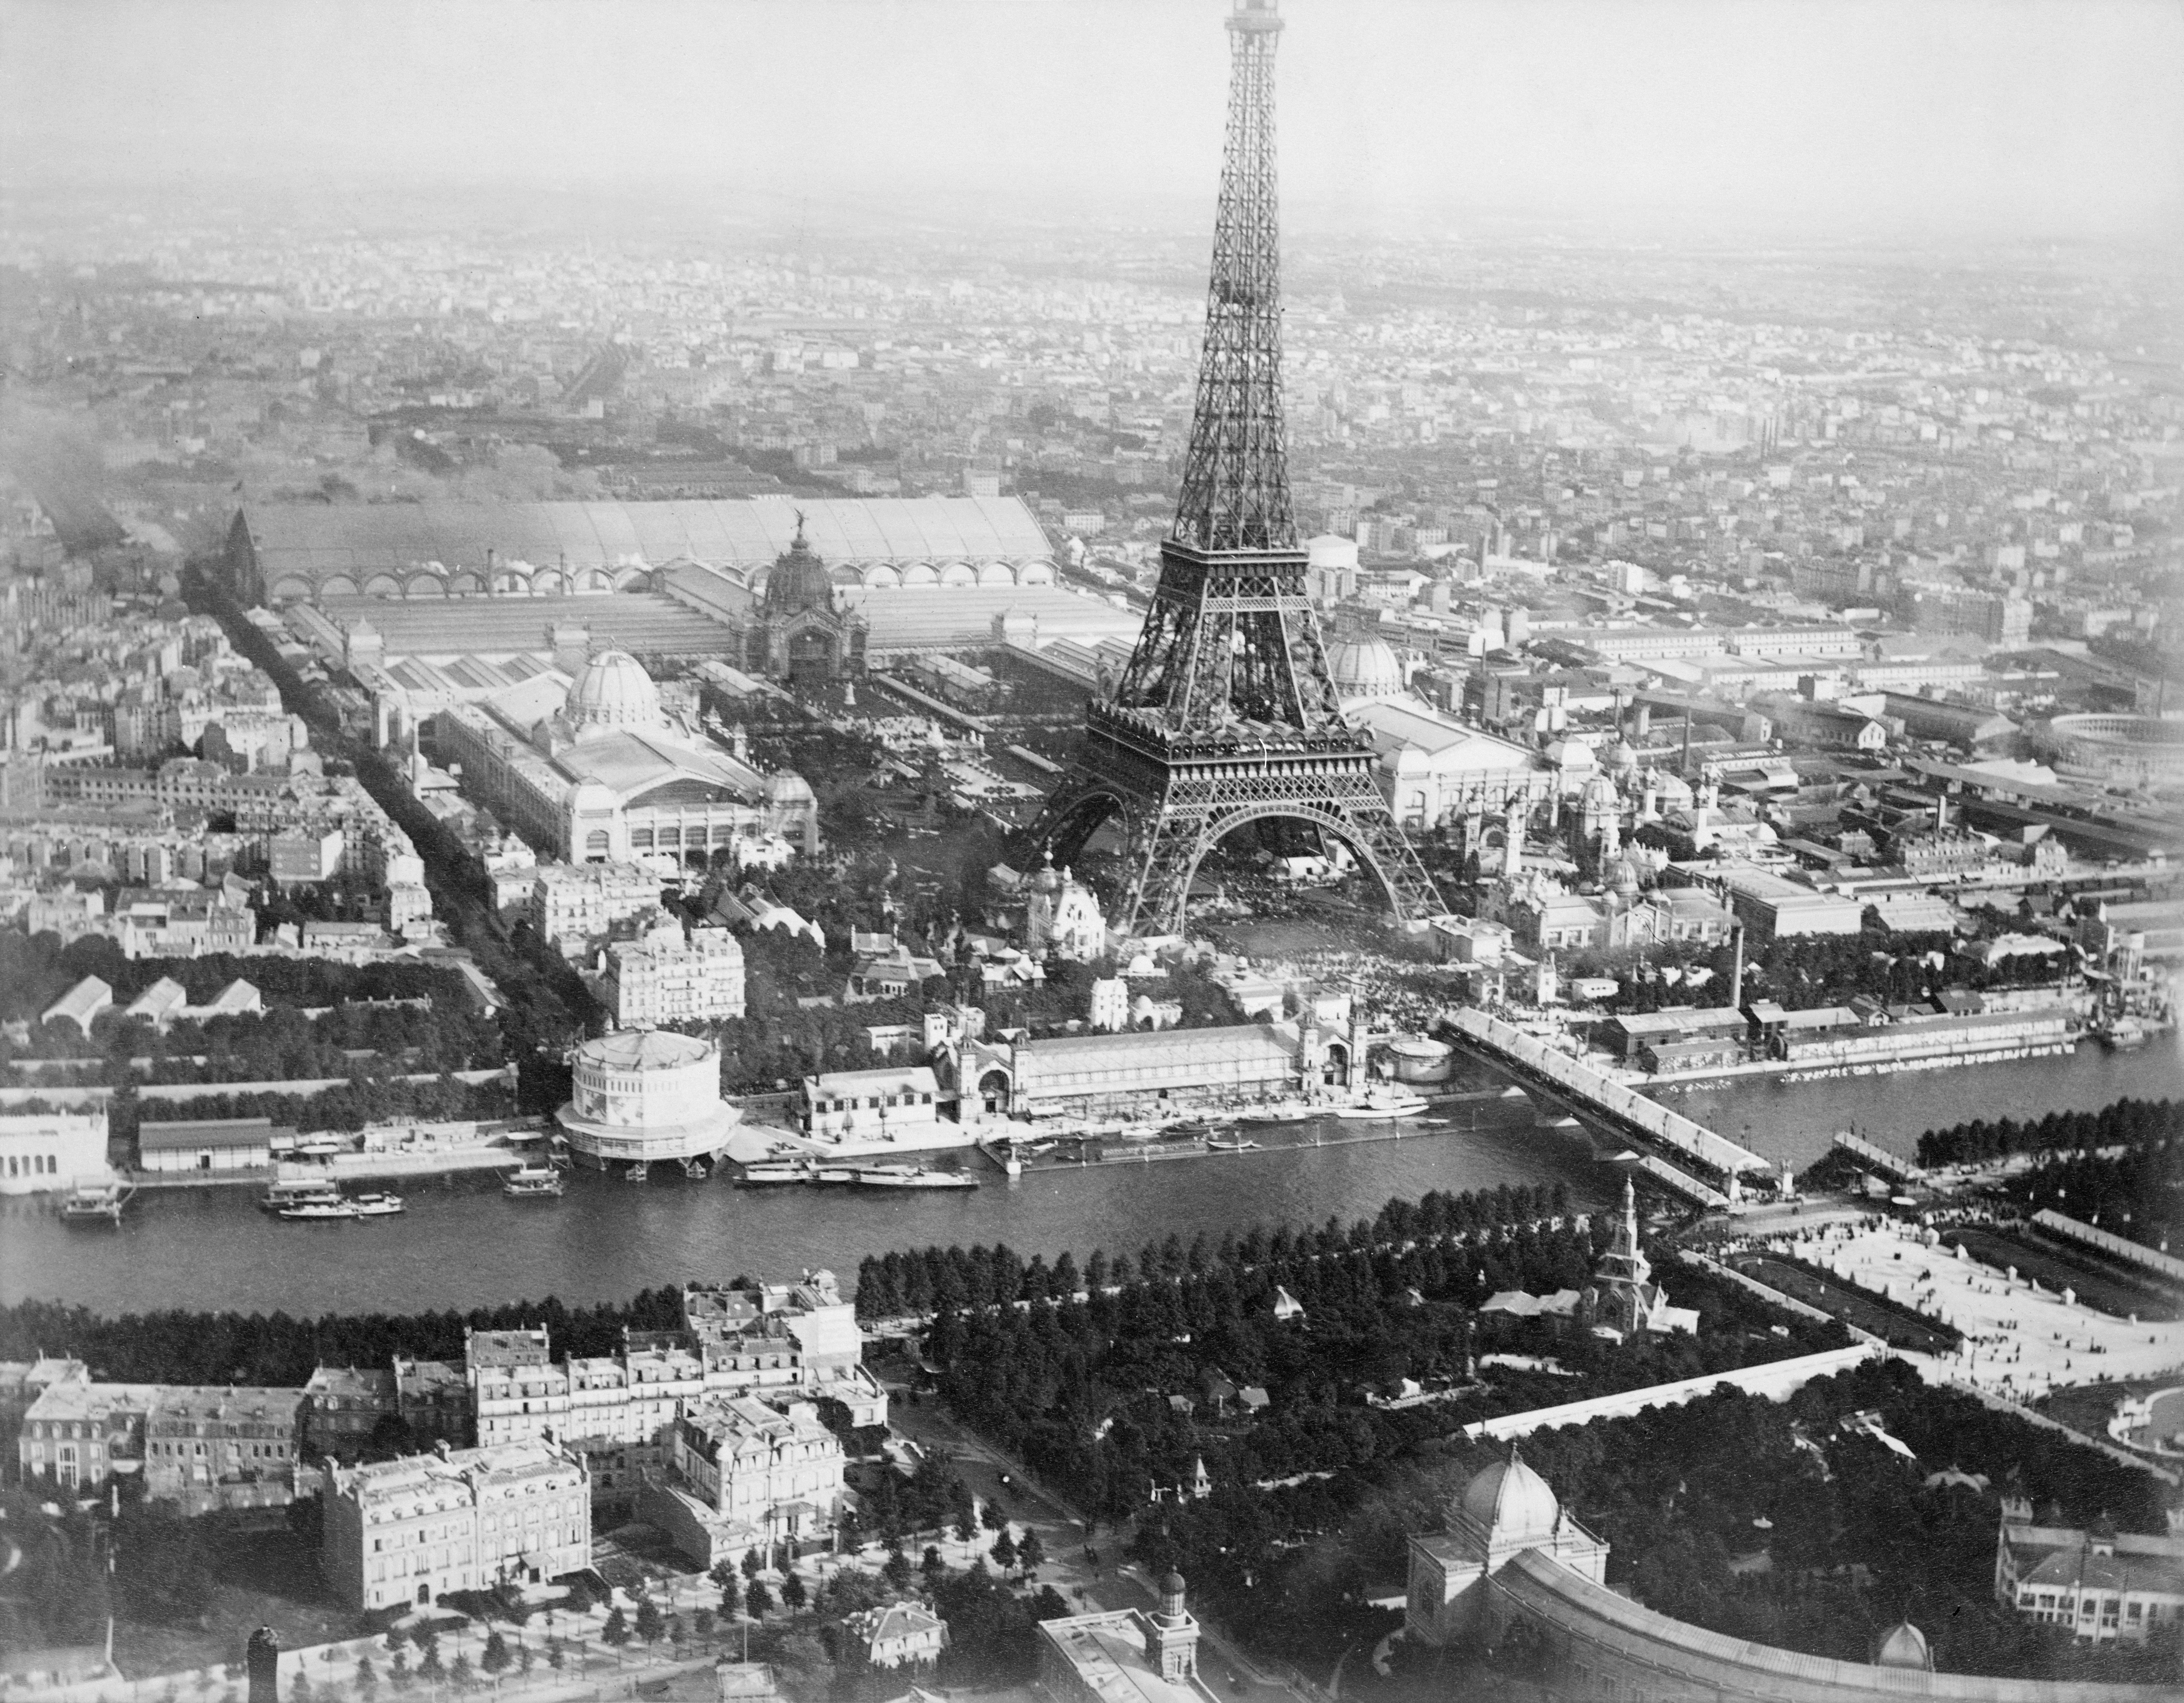 Fascinating Historical Picture of Eiffel Tower in 1889 